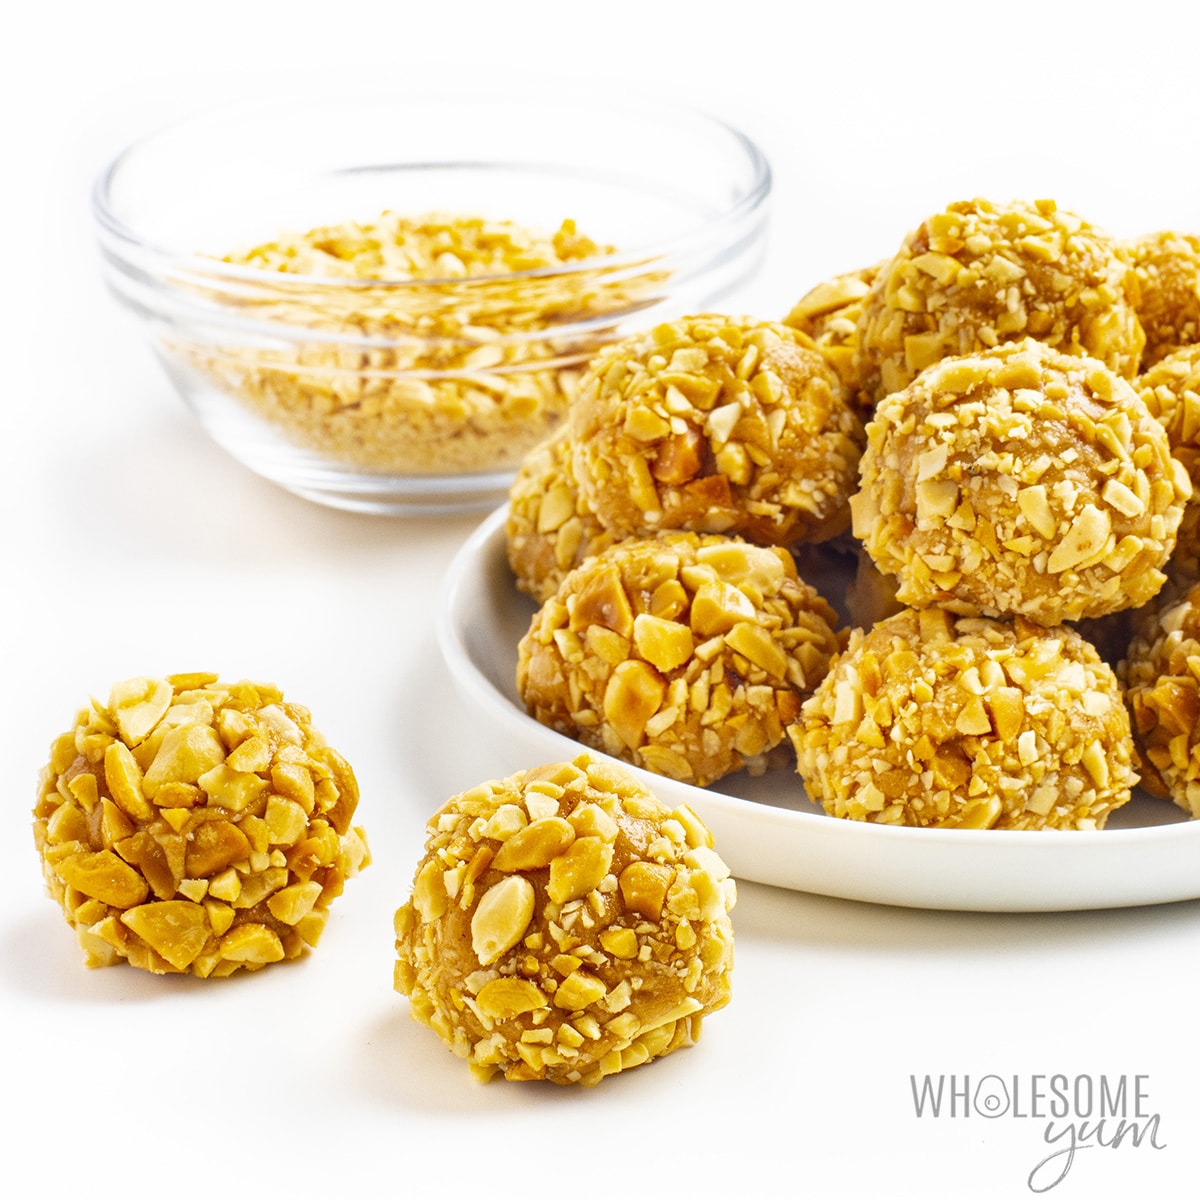 Keto peanut butter protein balls piled on a plate